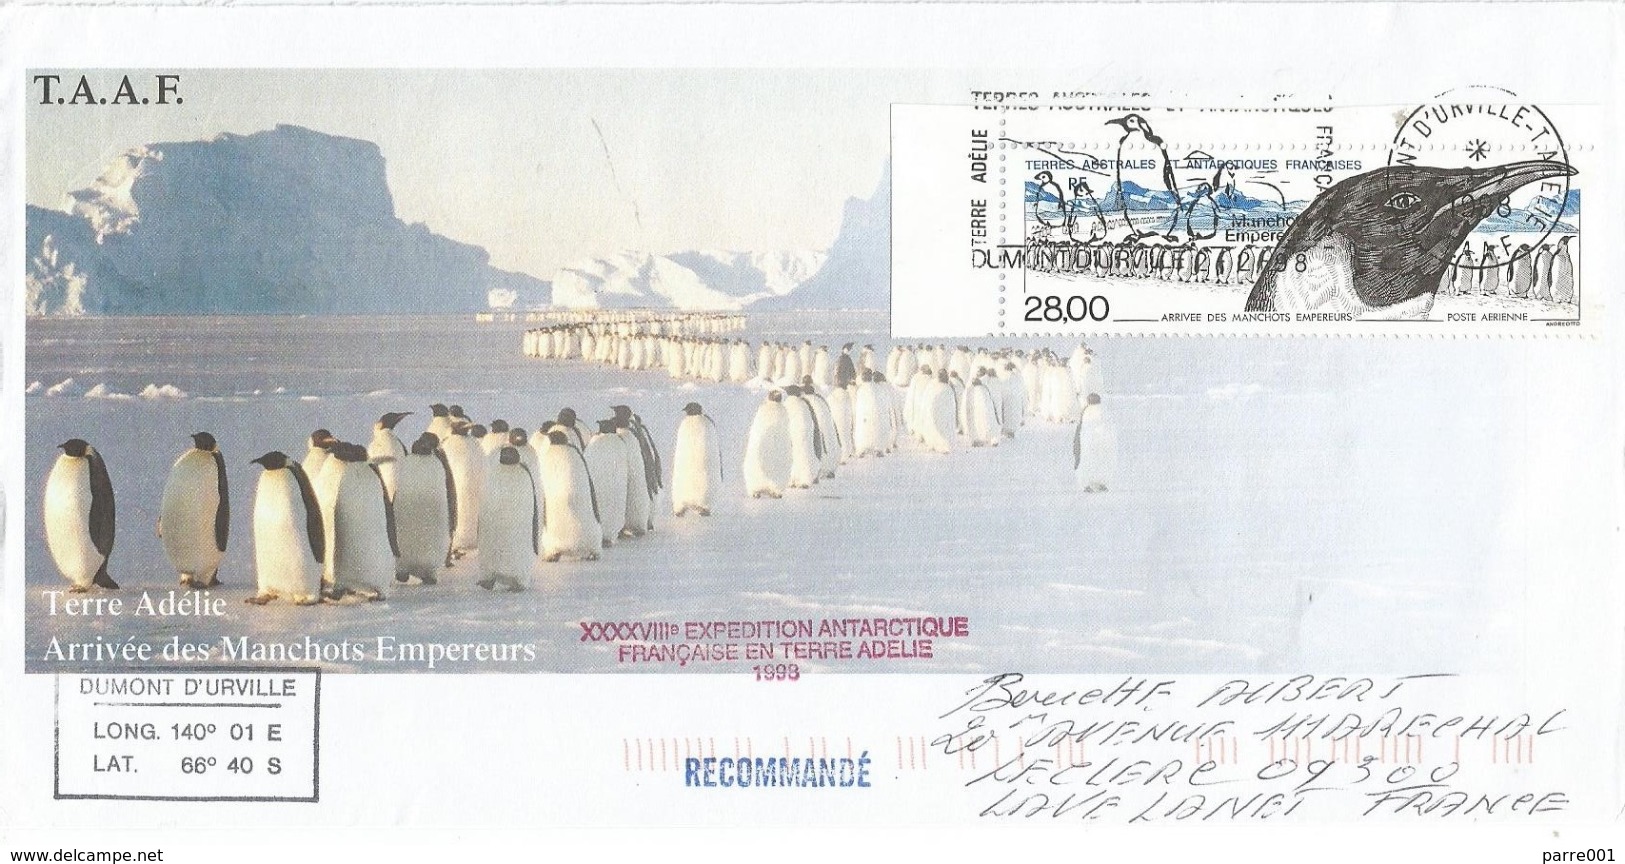 TAAF 1998 Dumont D'Urville Pinguin Expedition Antarctica Cover - Penguins